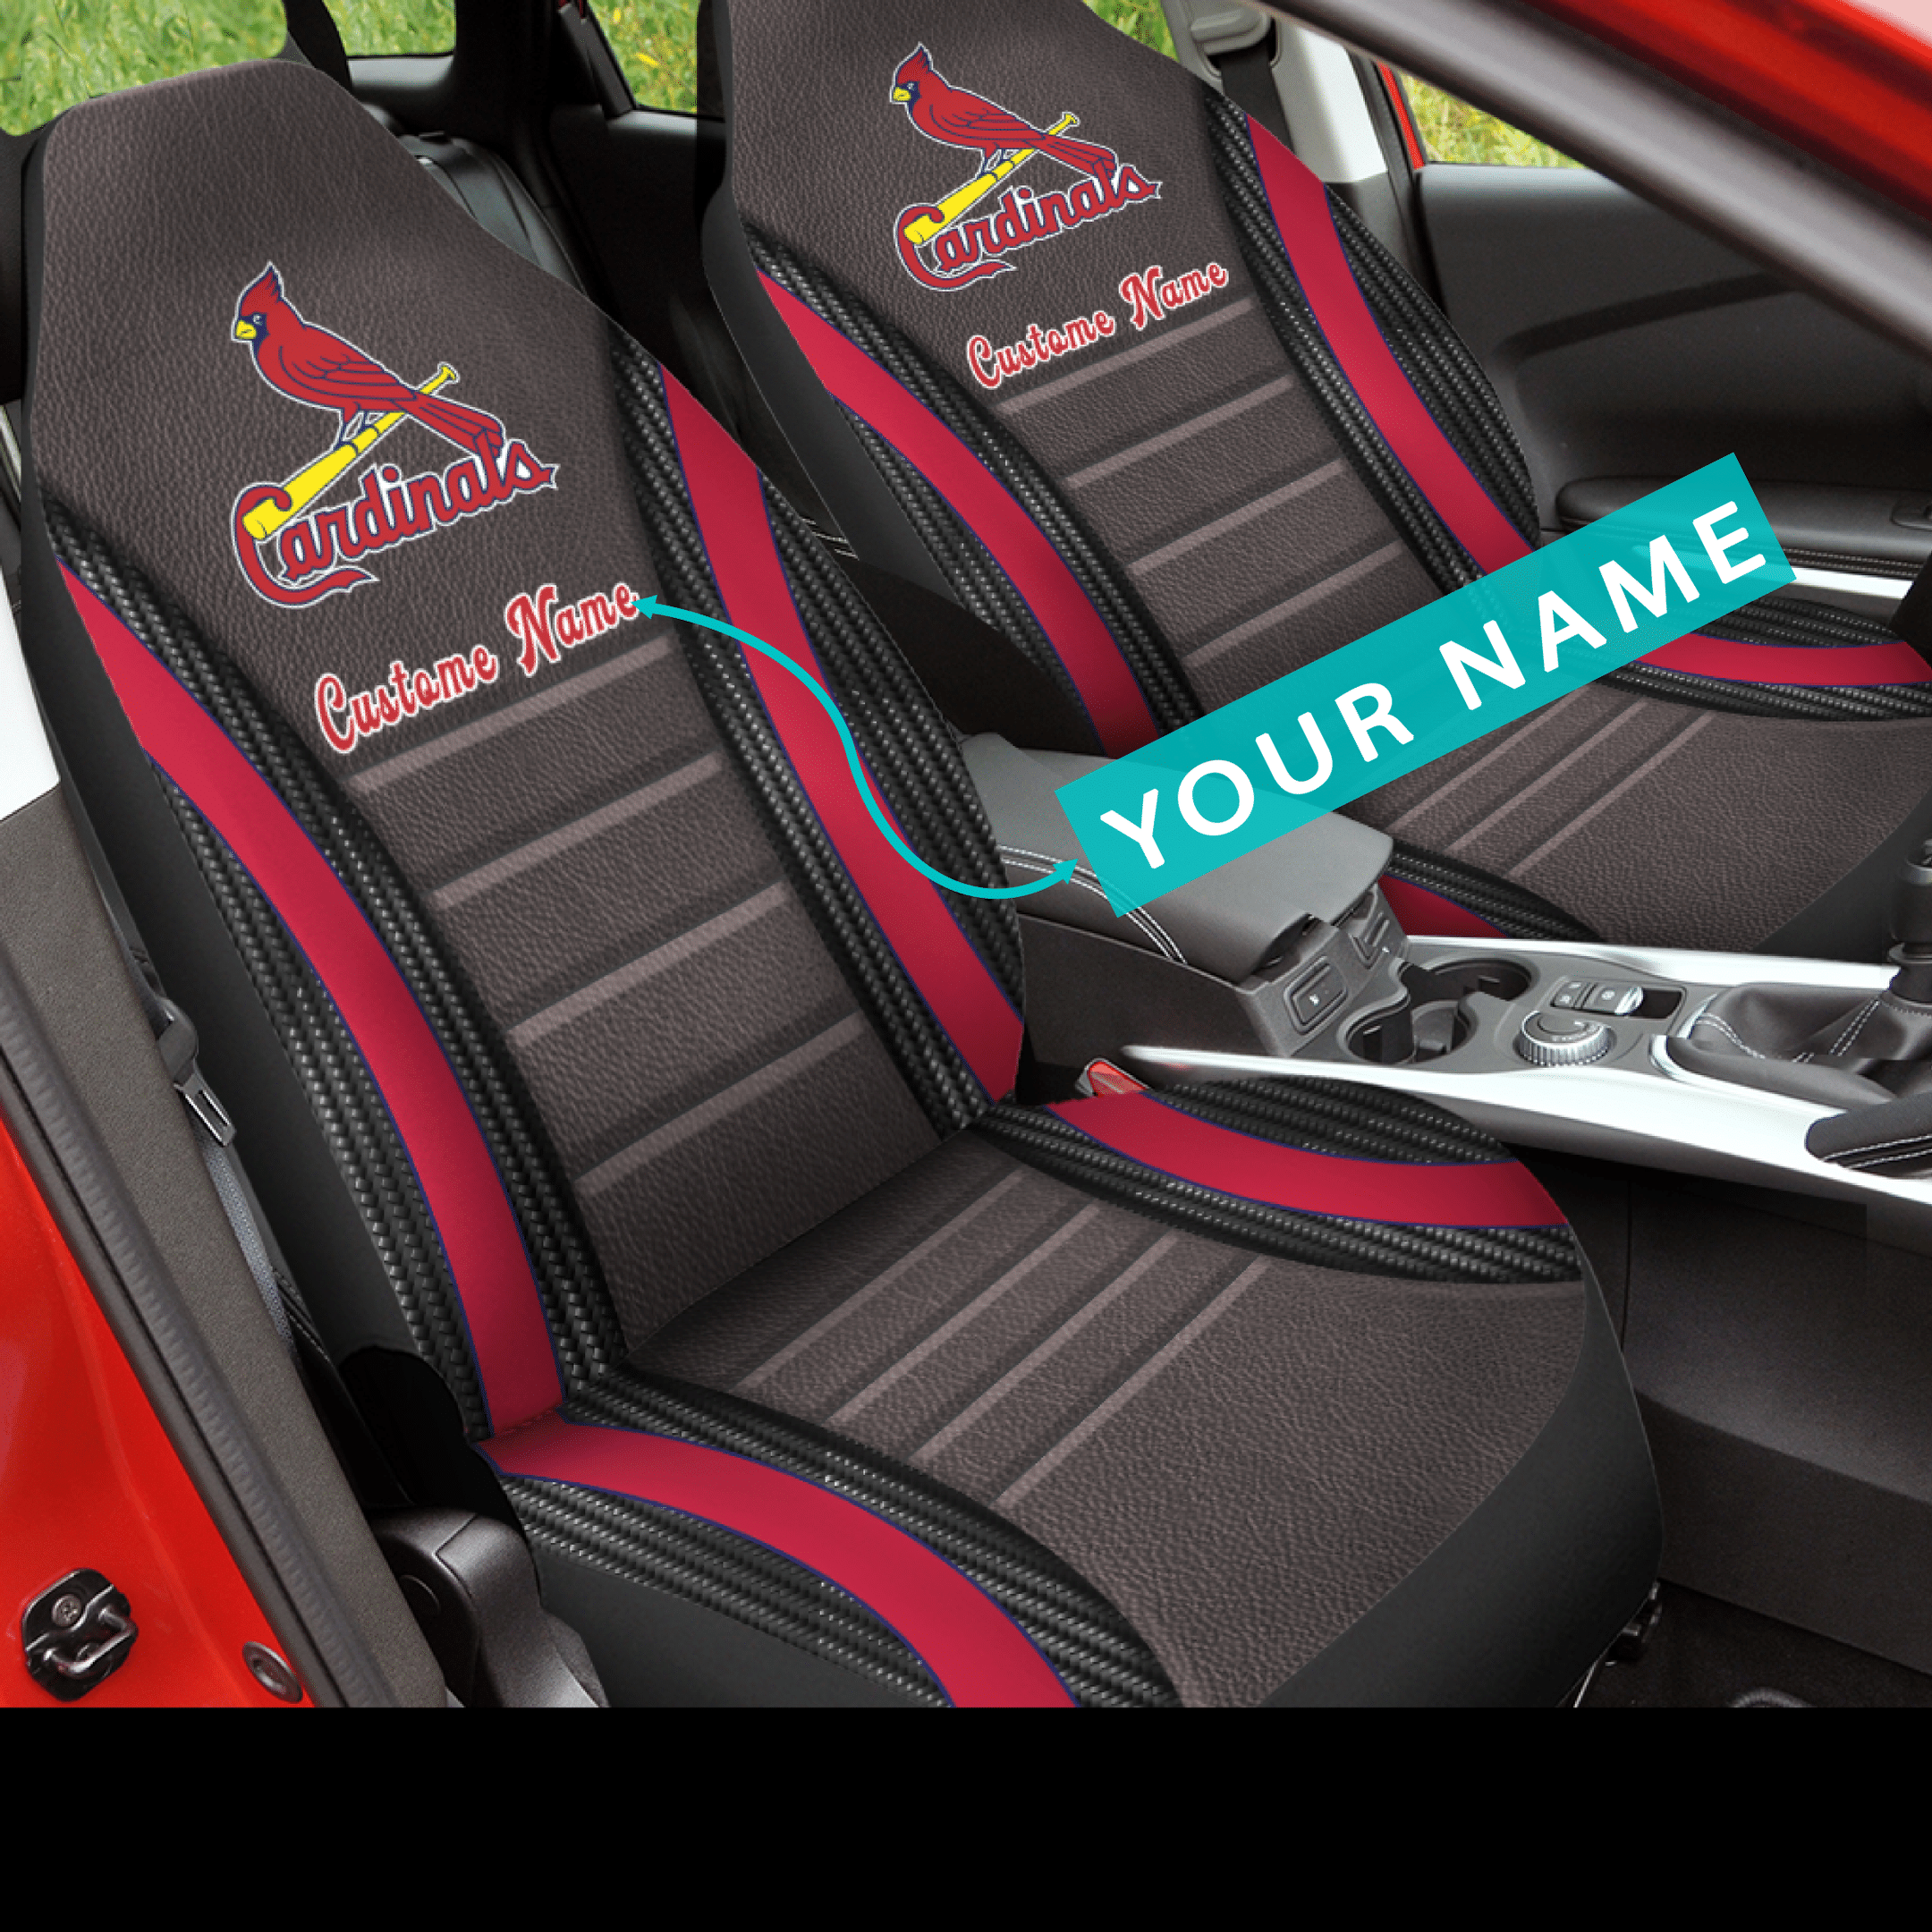 Click now to buy top cool seat cover to protect your car 317